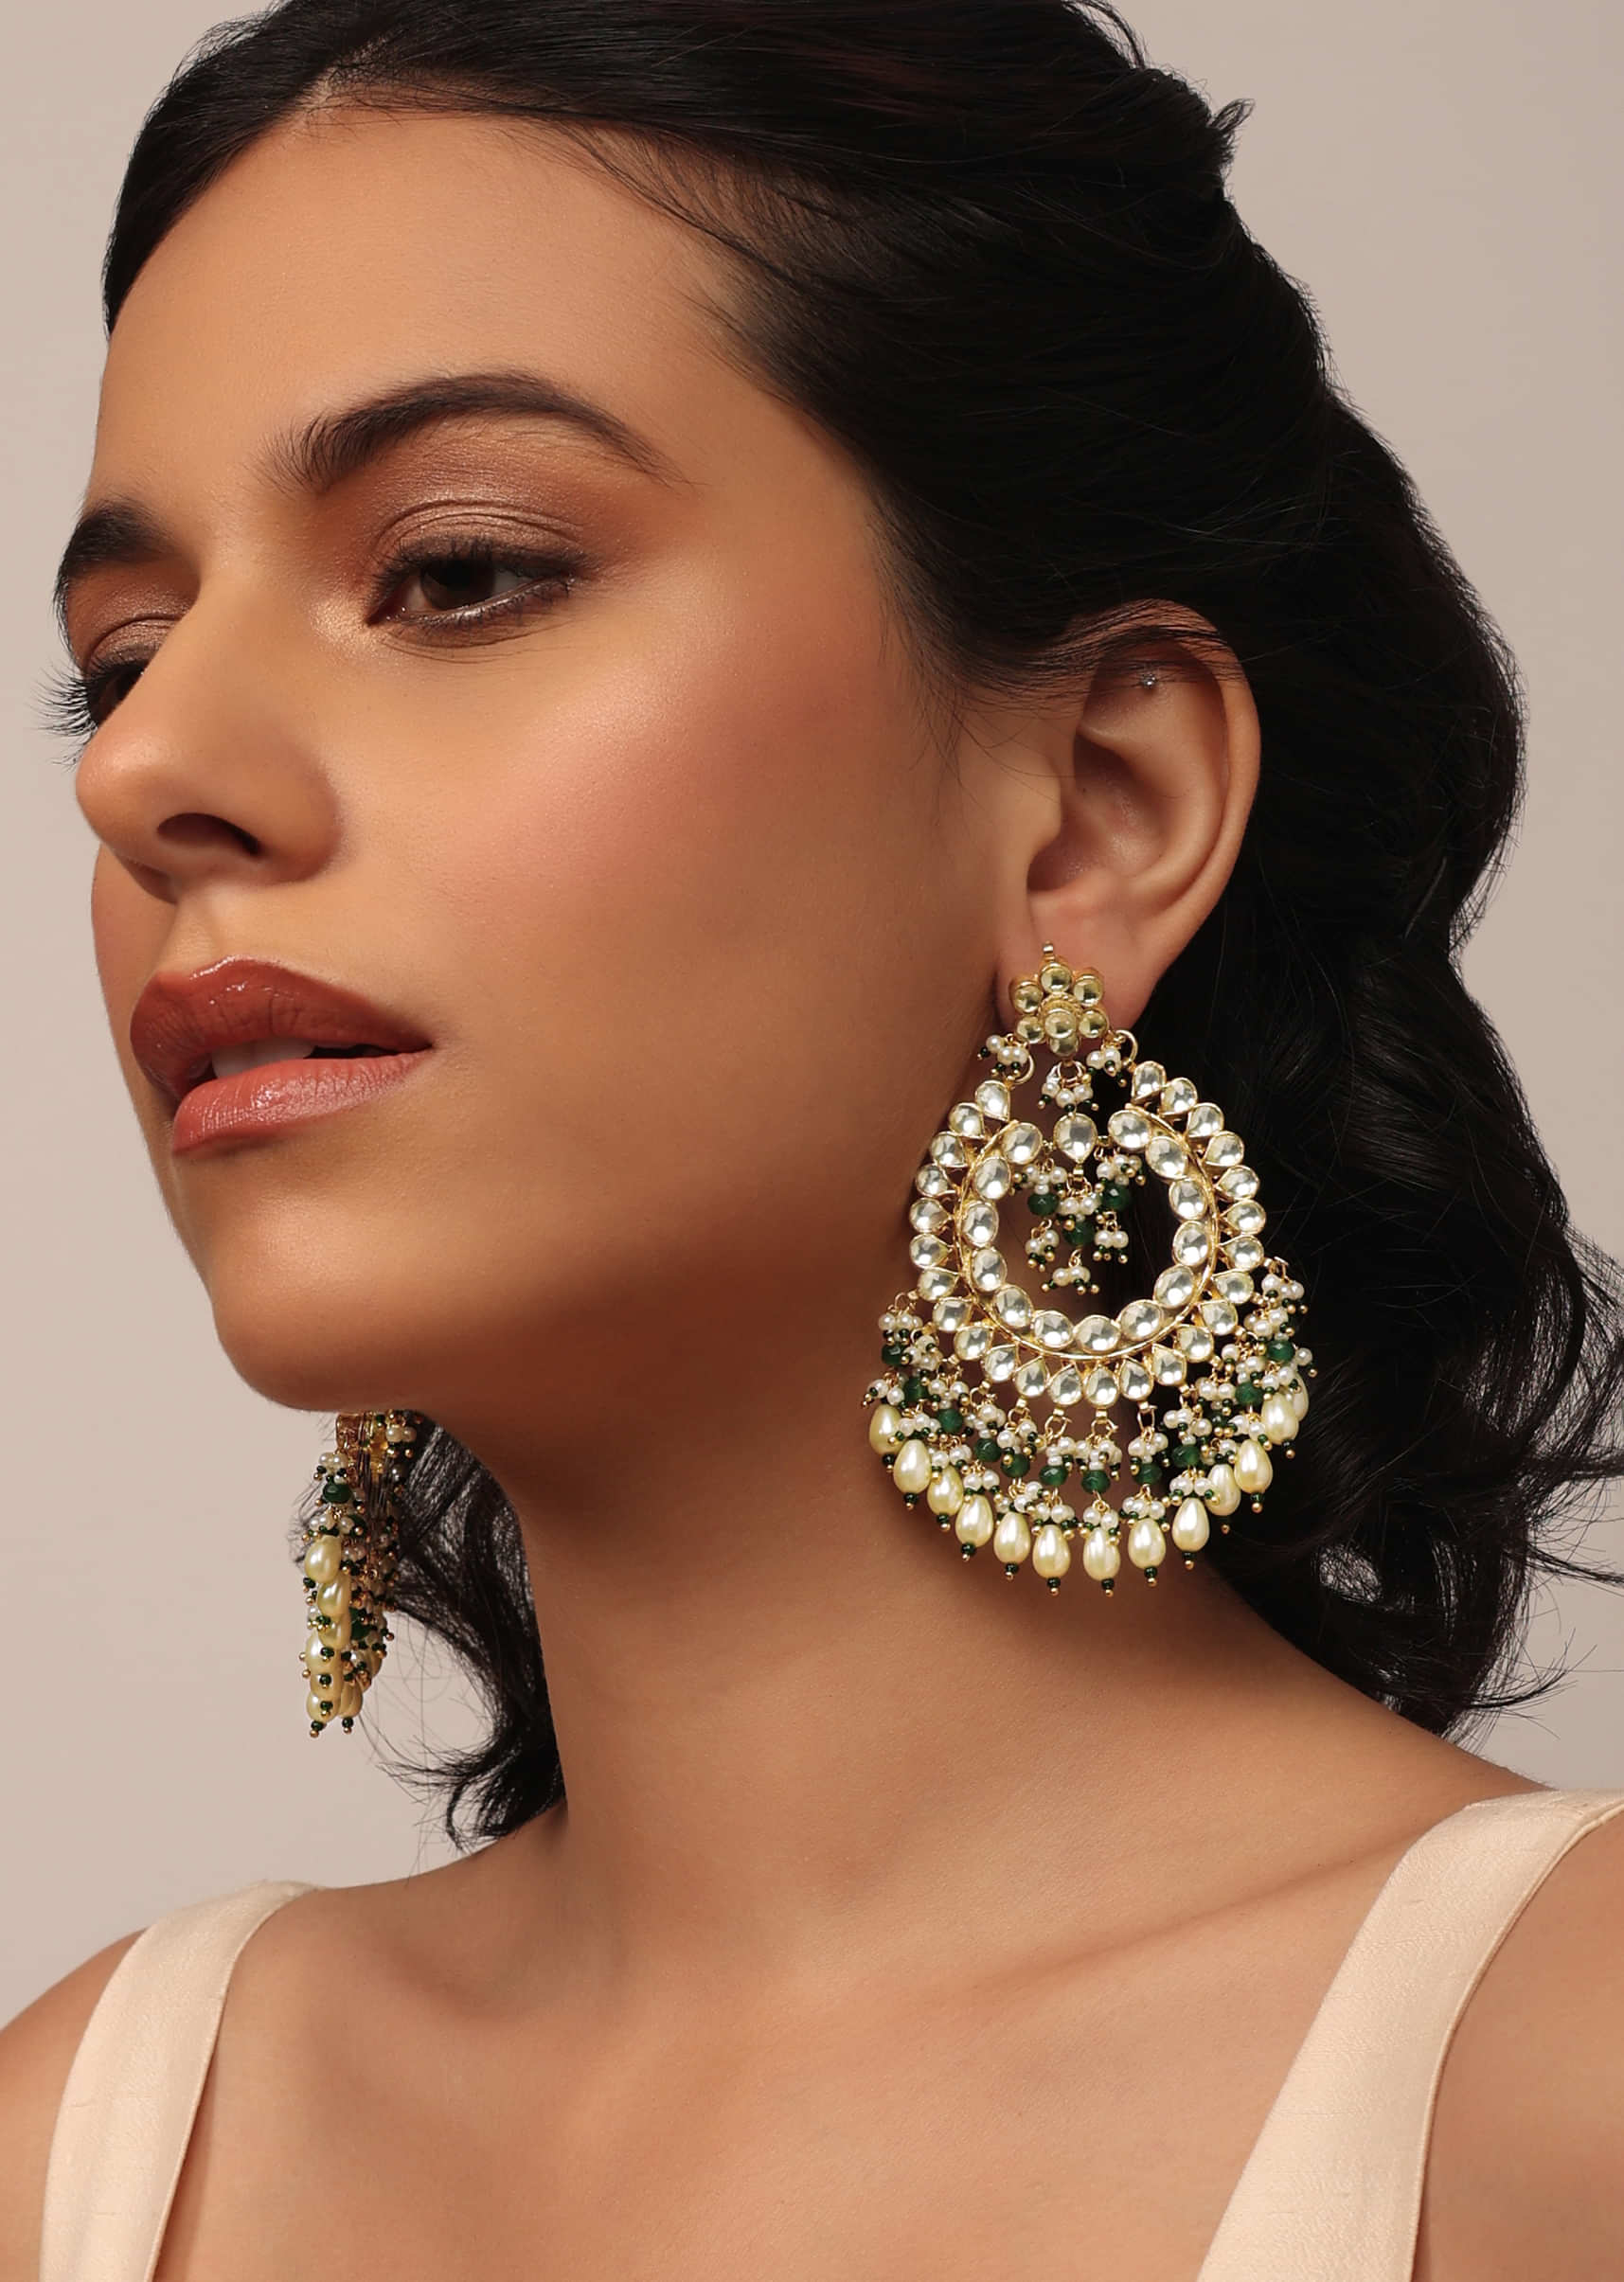 Gold Finish Kundan Earrings With Beads And Synthetic Emerald Stones